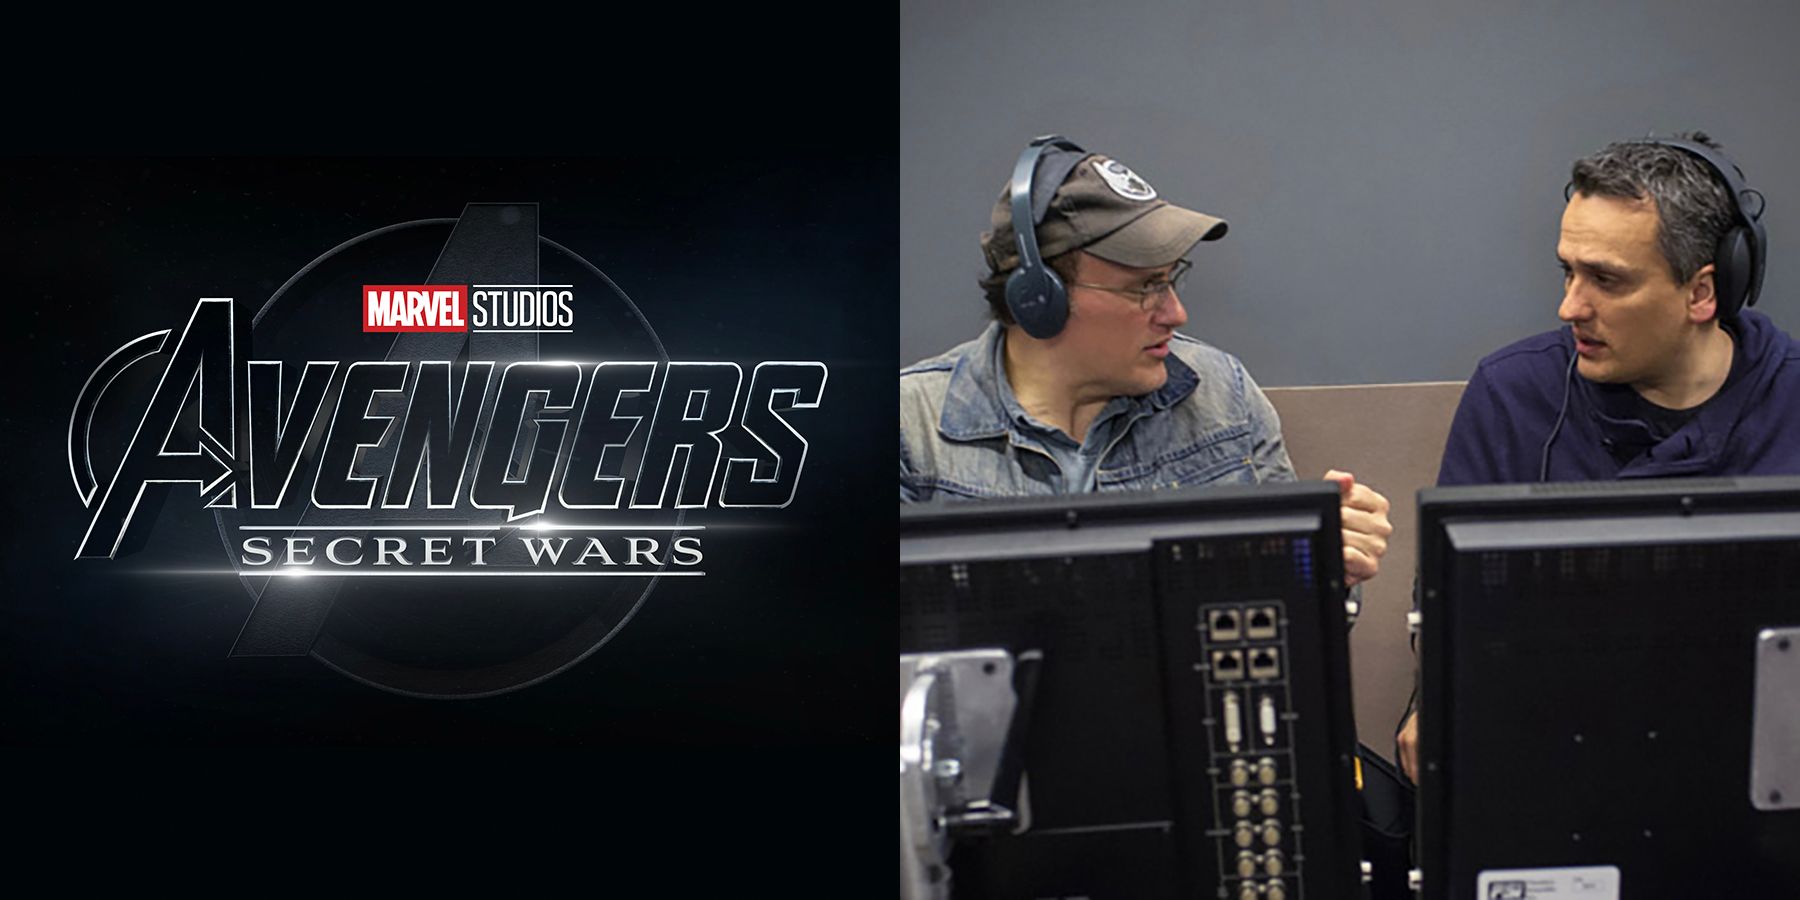 Russo Brothers Are “Not Connected To Next Two 'Avengers' Films